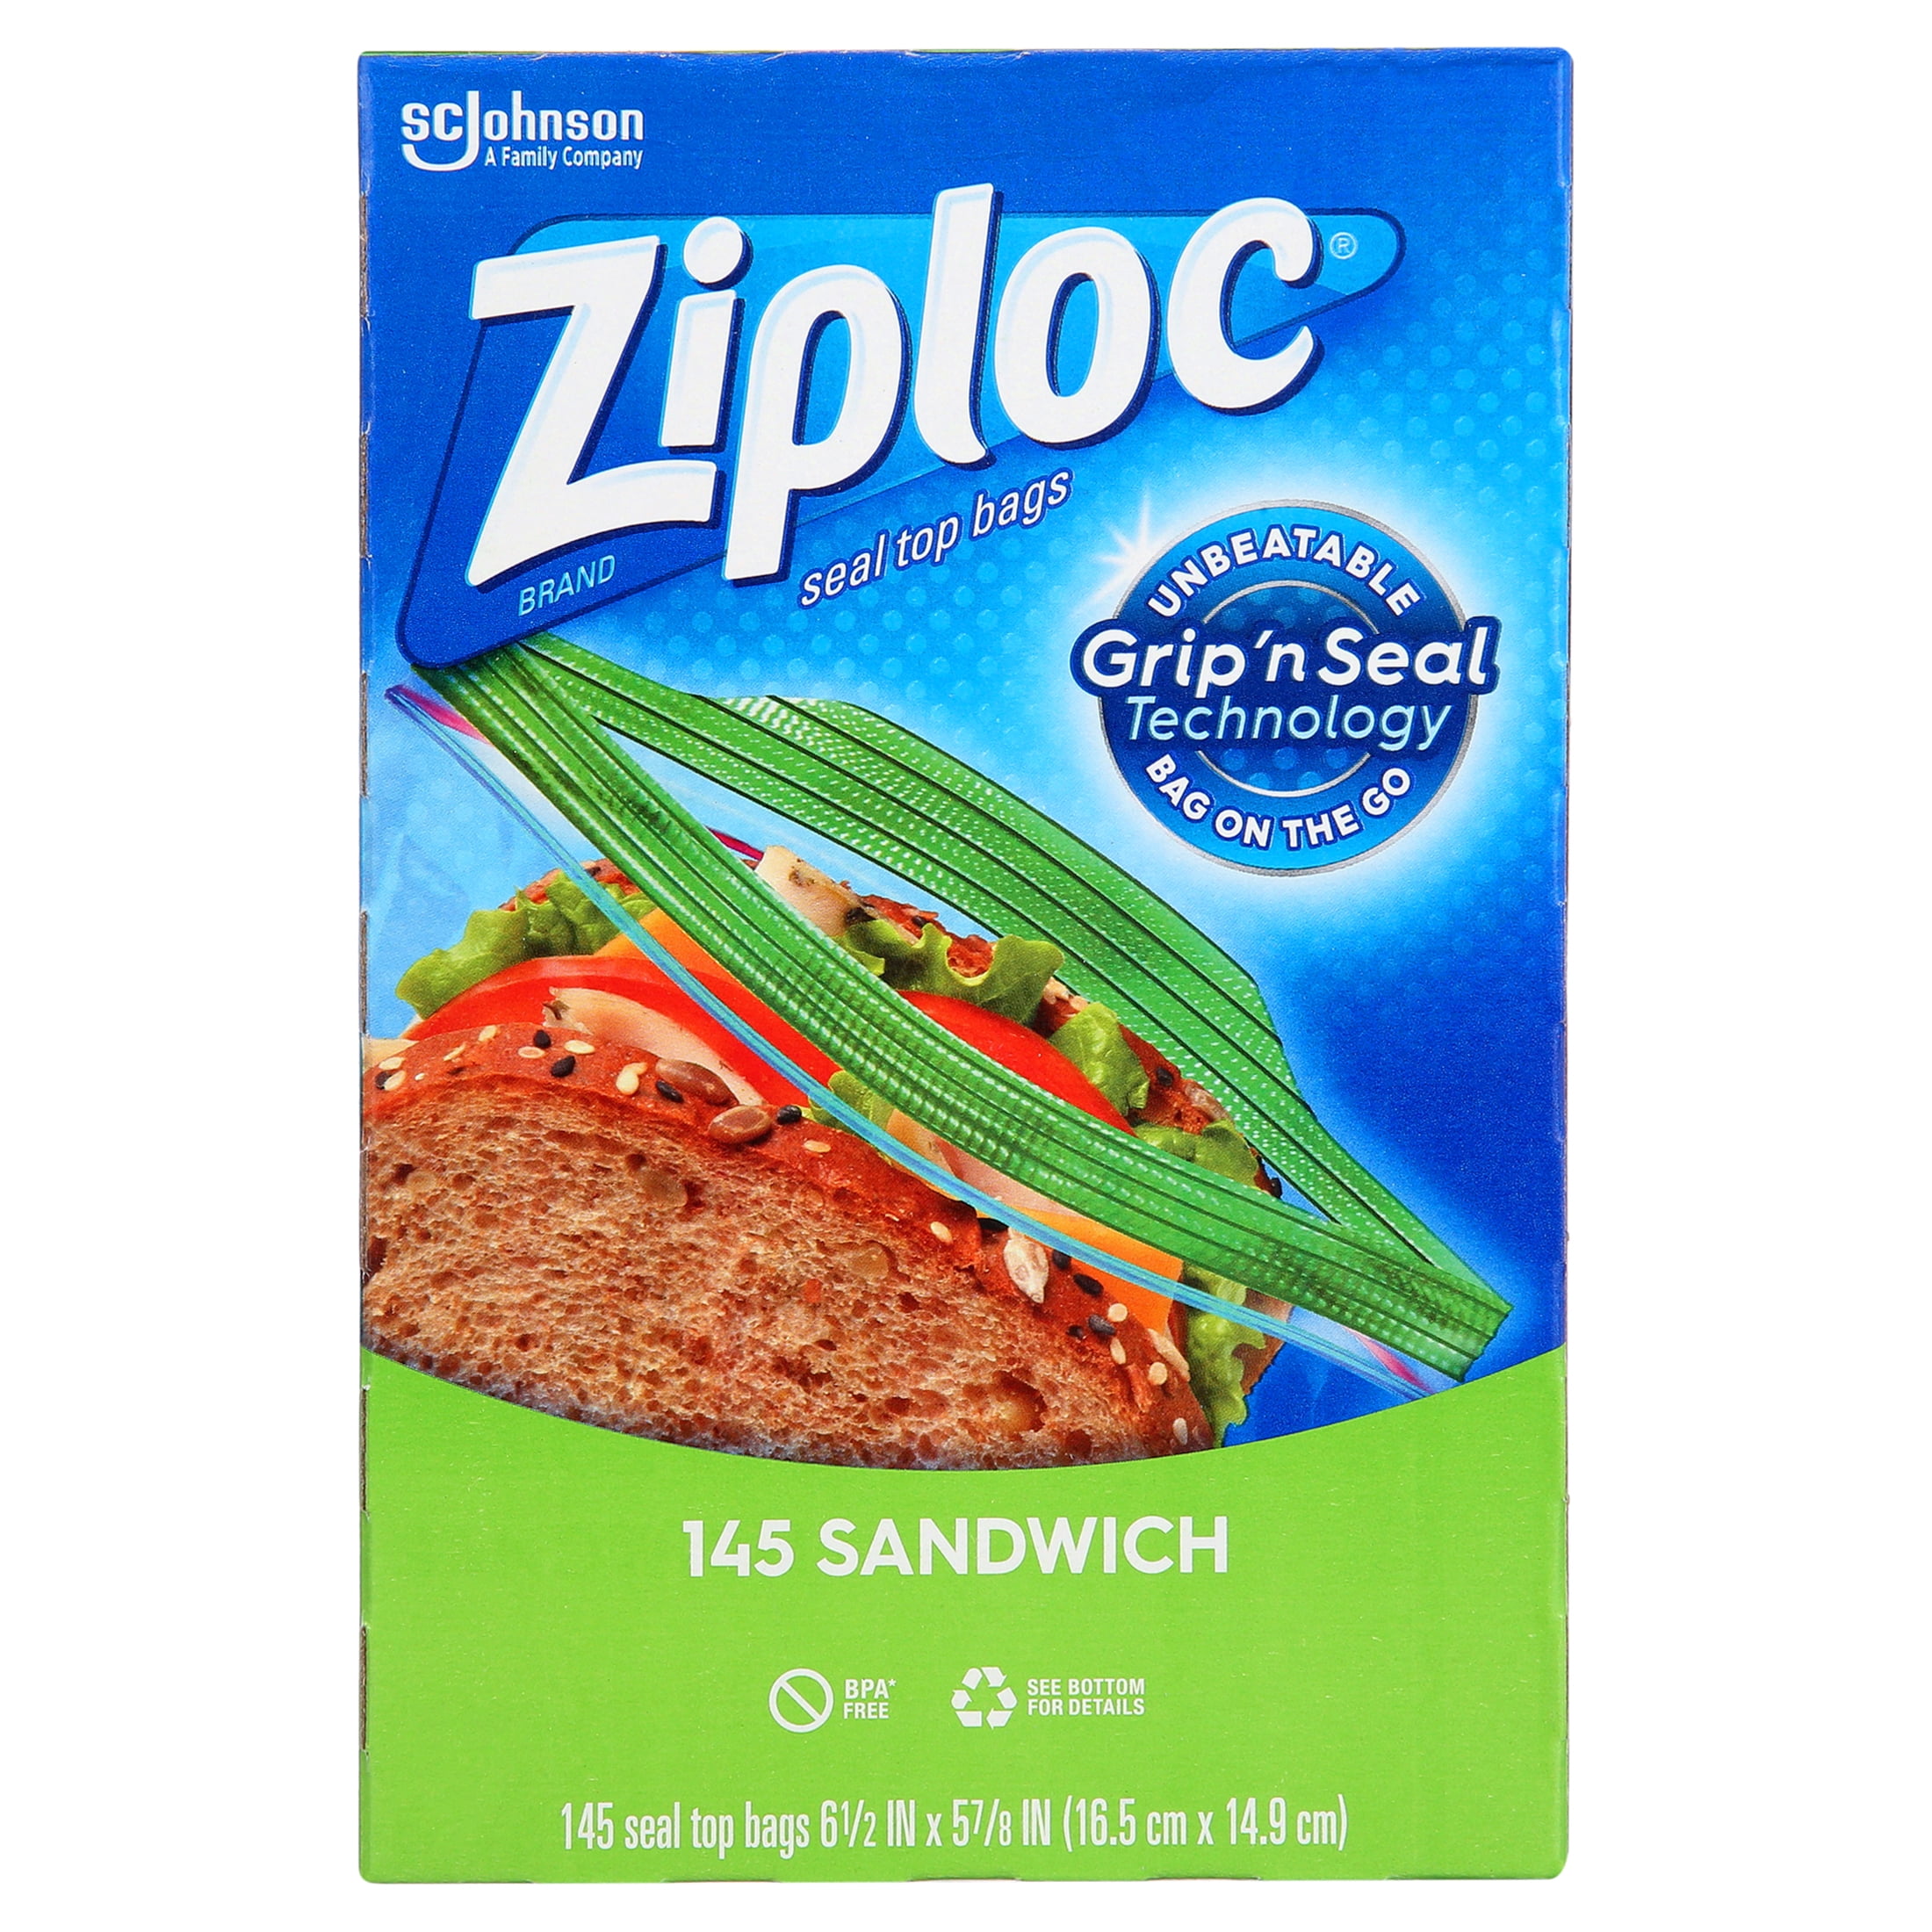 Ziploc Sandwich Bags (280 count) only $5.17 shipped!